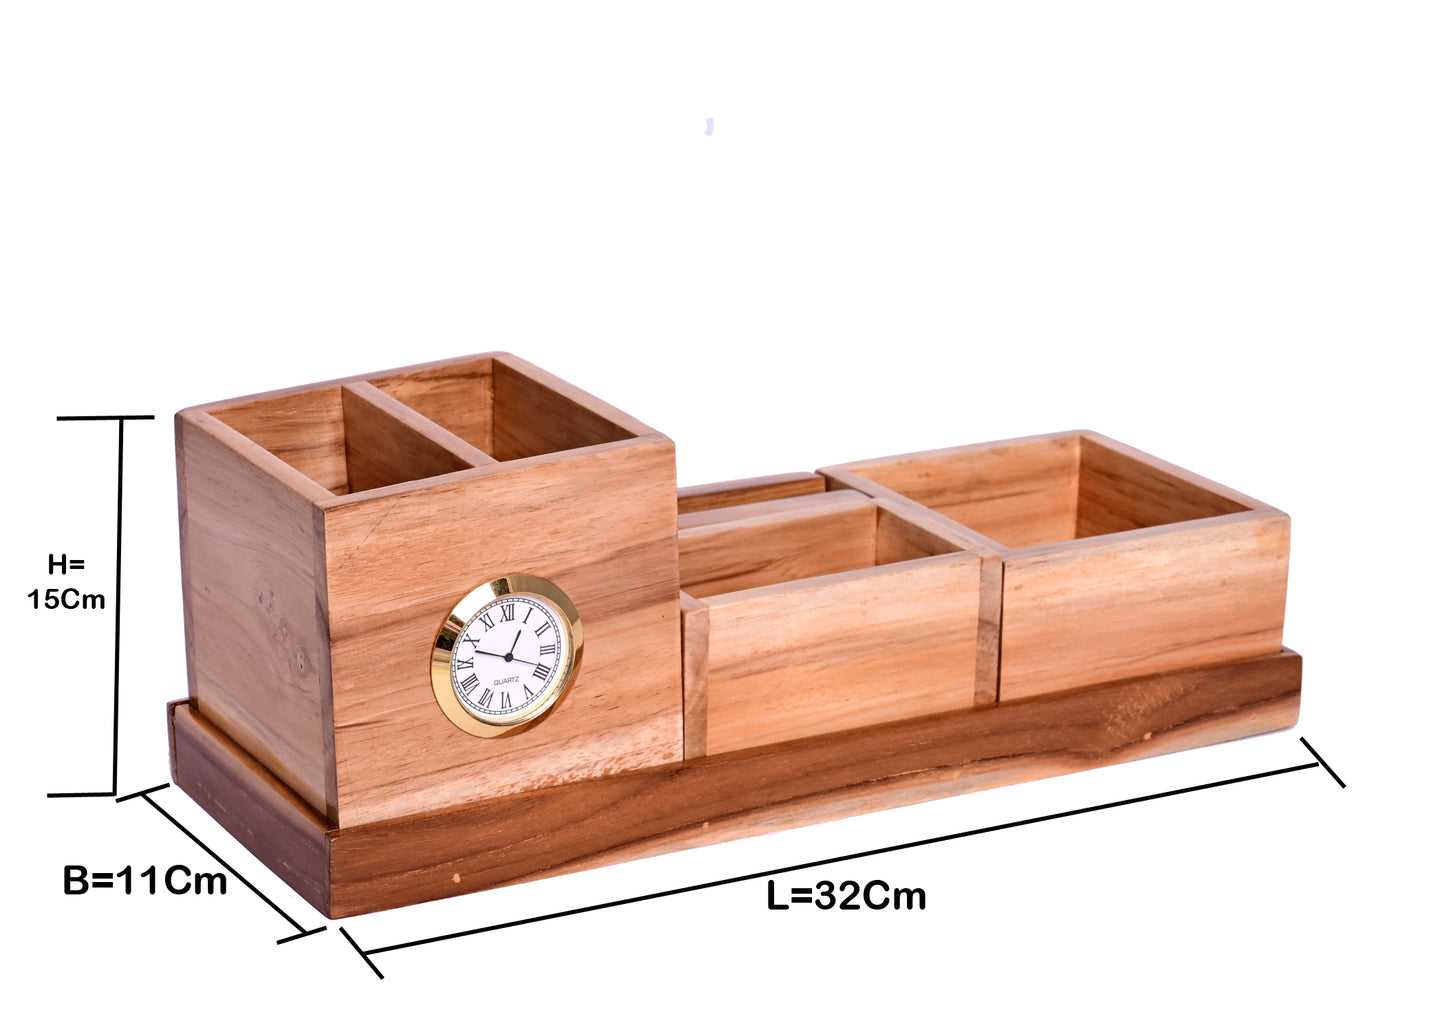 The Weaver's Nest Teak Wood Desk Organizer with Pen Stand, Clock, Mobile Phone Holder for Home and Office